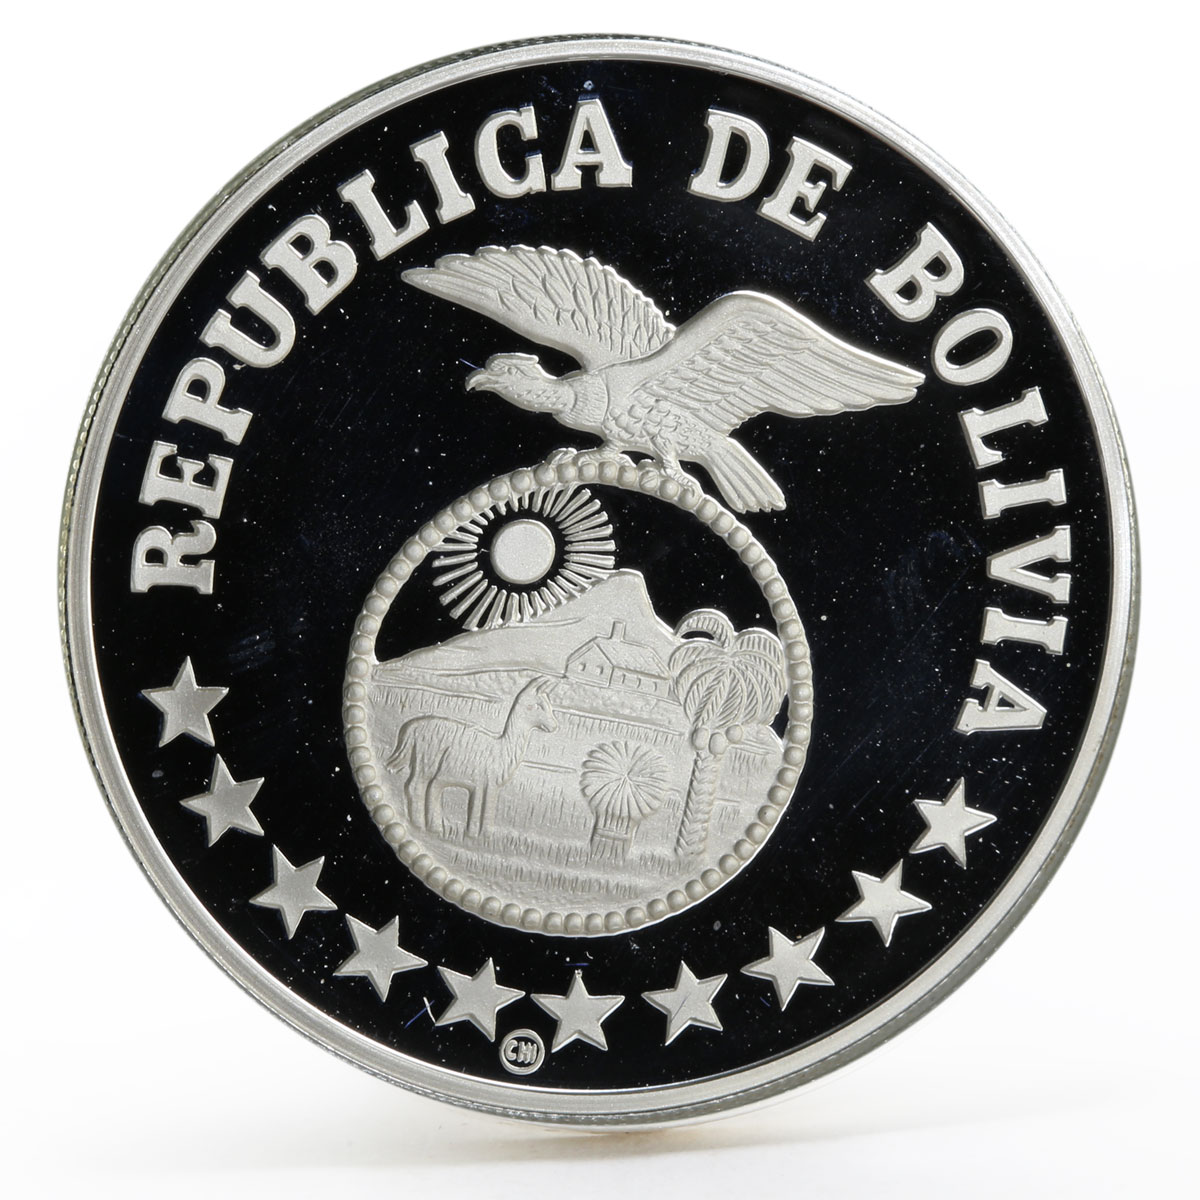 Bolivia 200 pesos International Year of the Child proof silver coin 1979